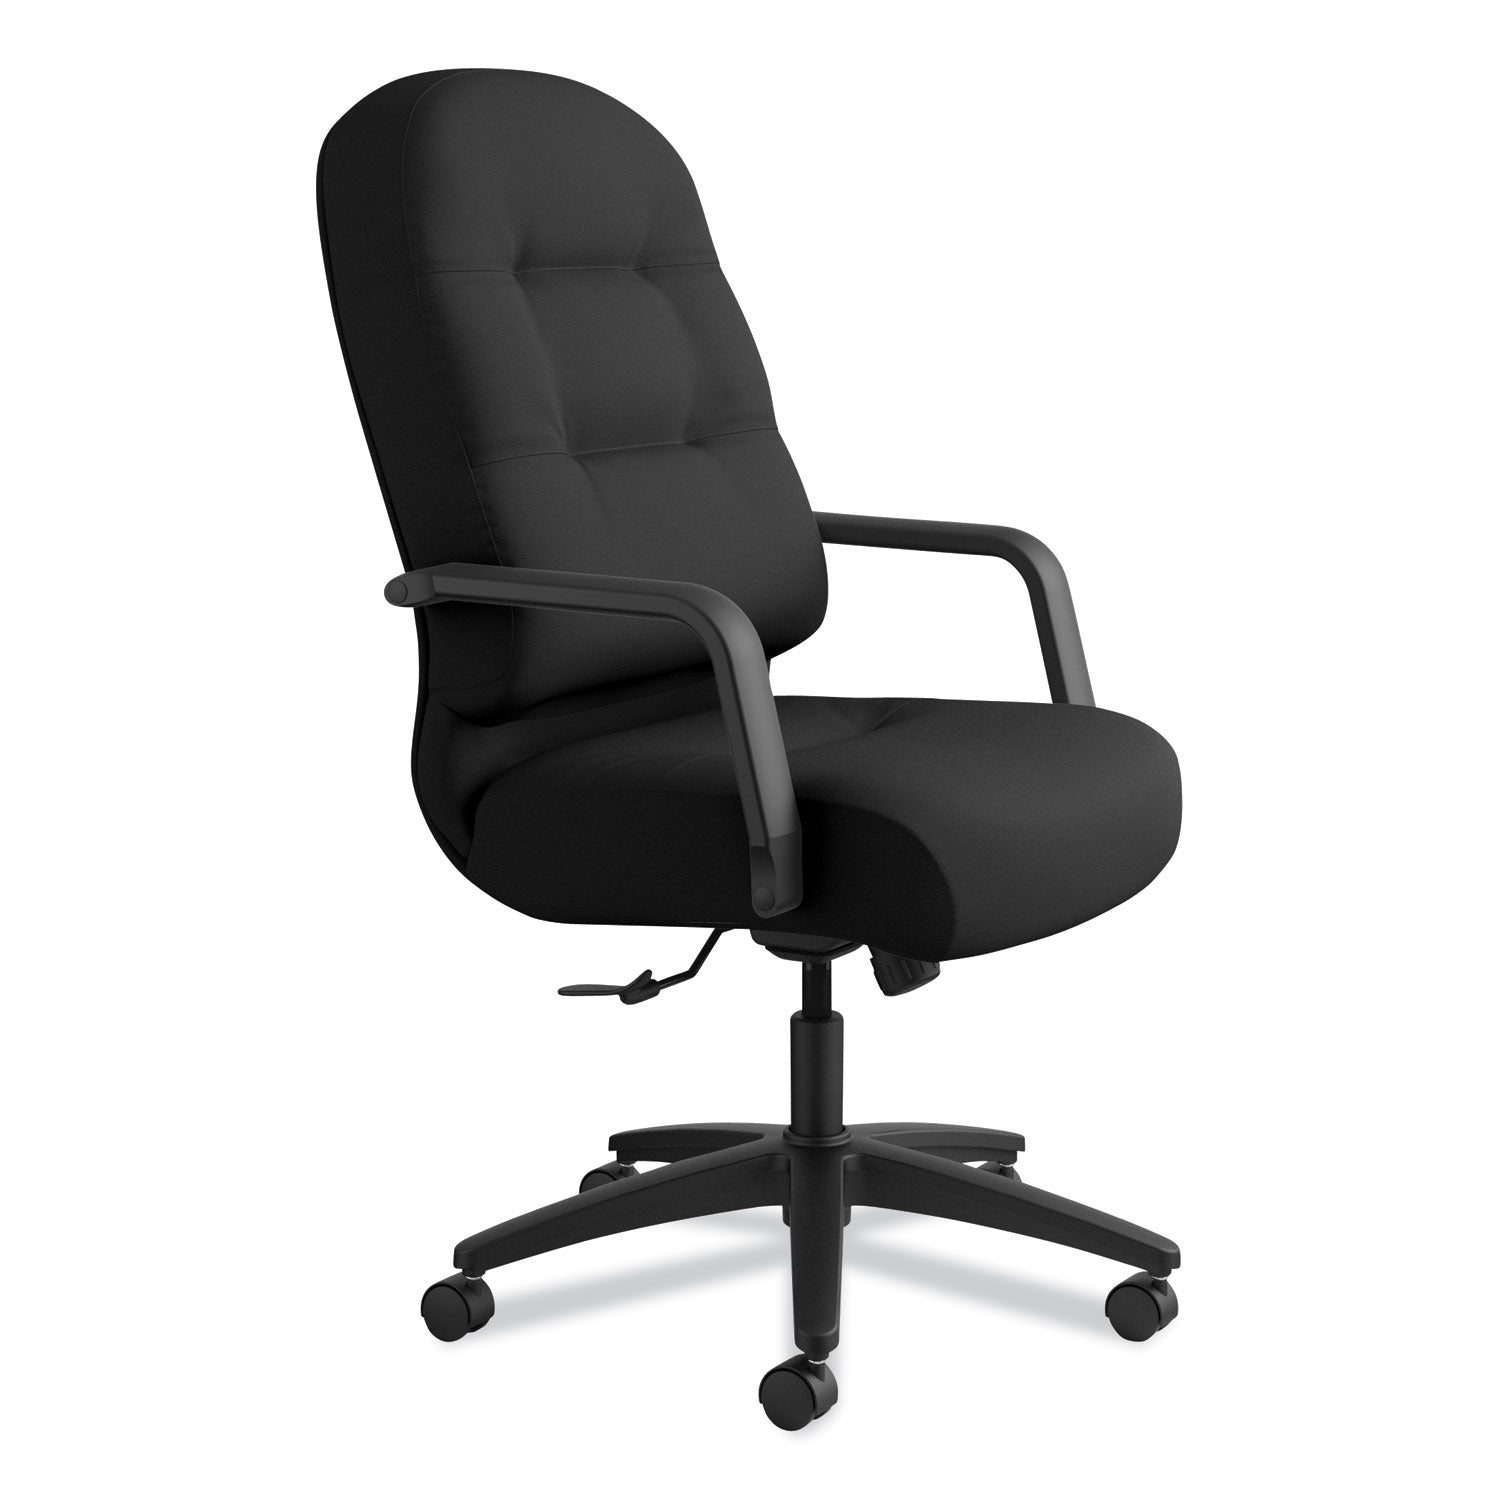 Pillow-Soft 2090 Series Executive High-Back Swivel/Tilt Chair, Supports Up to 300 lb, 17" to 21" Seat Height, Black - 2